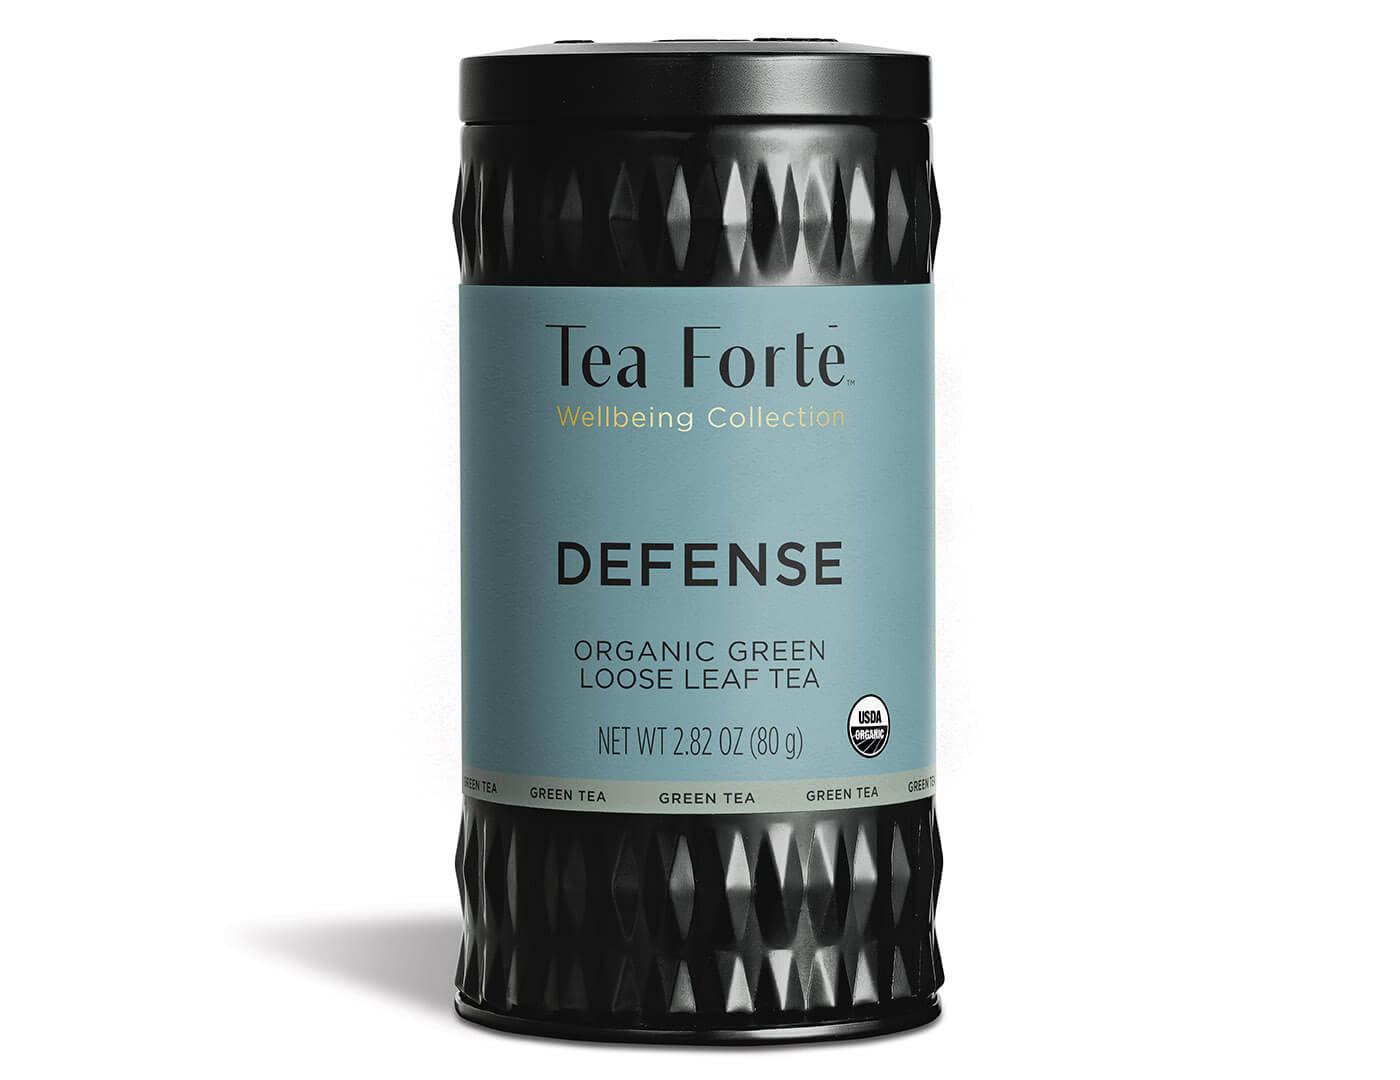 Defense tea in a canister of loose tea